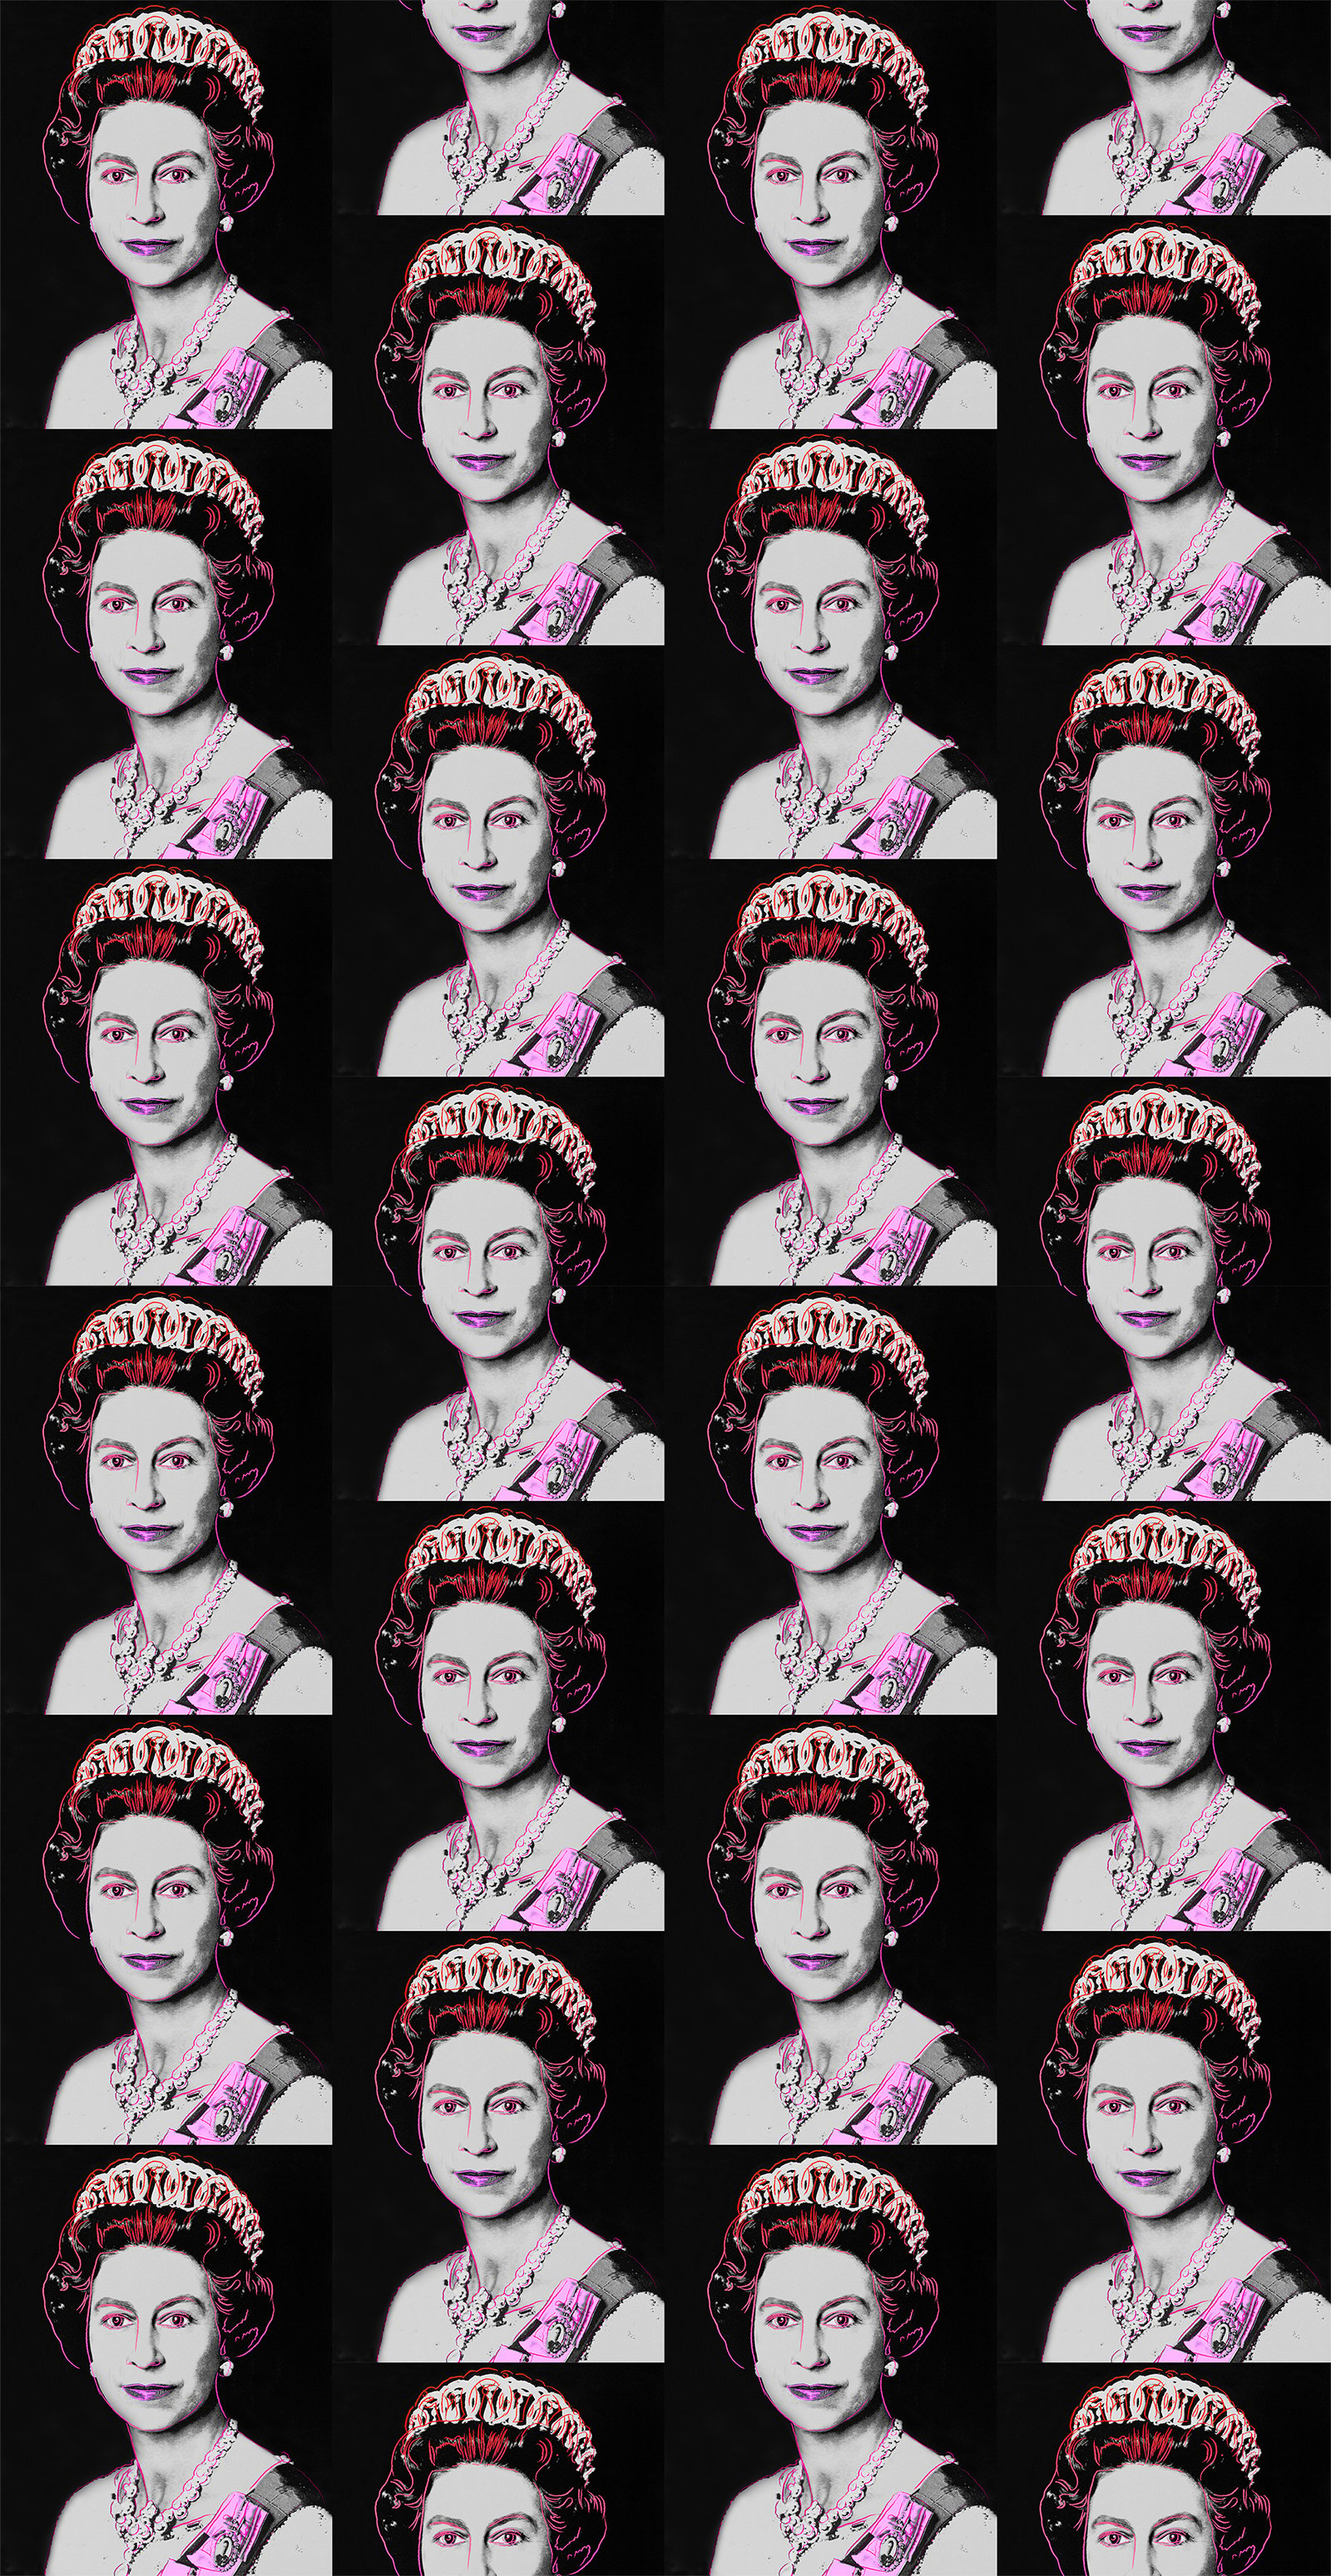 RIP Her Majesty Queen Elizabeth II 19262022  Coulsdon Sixth Form College